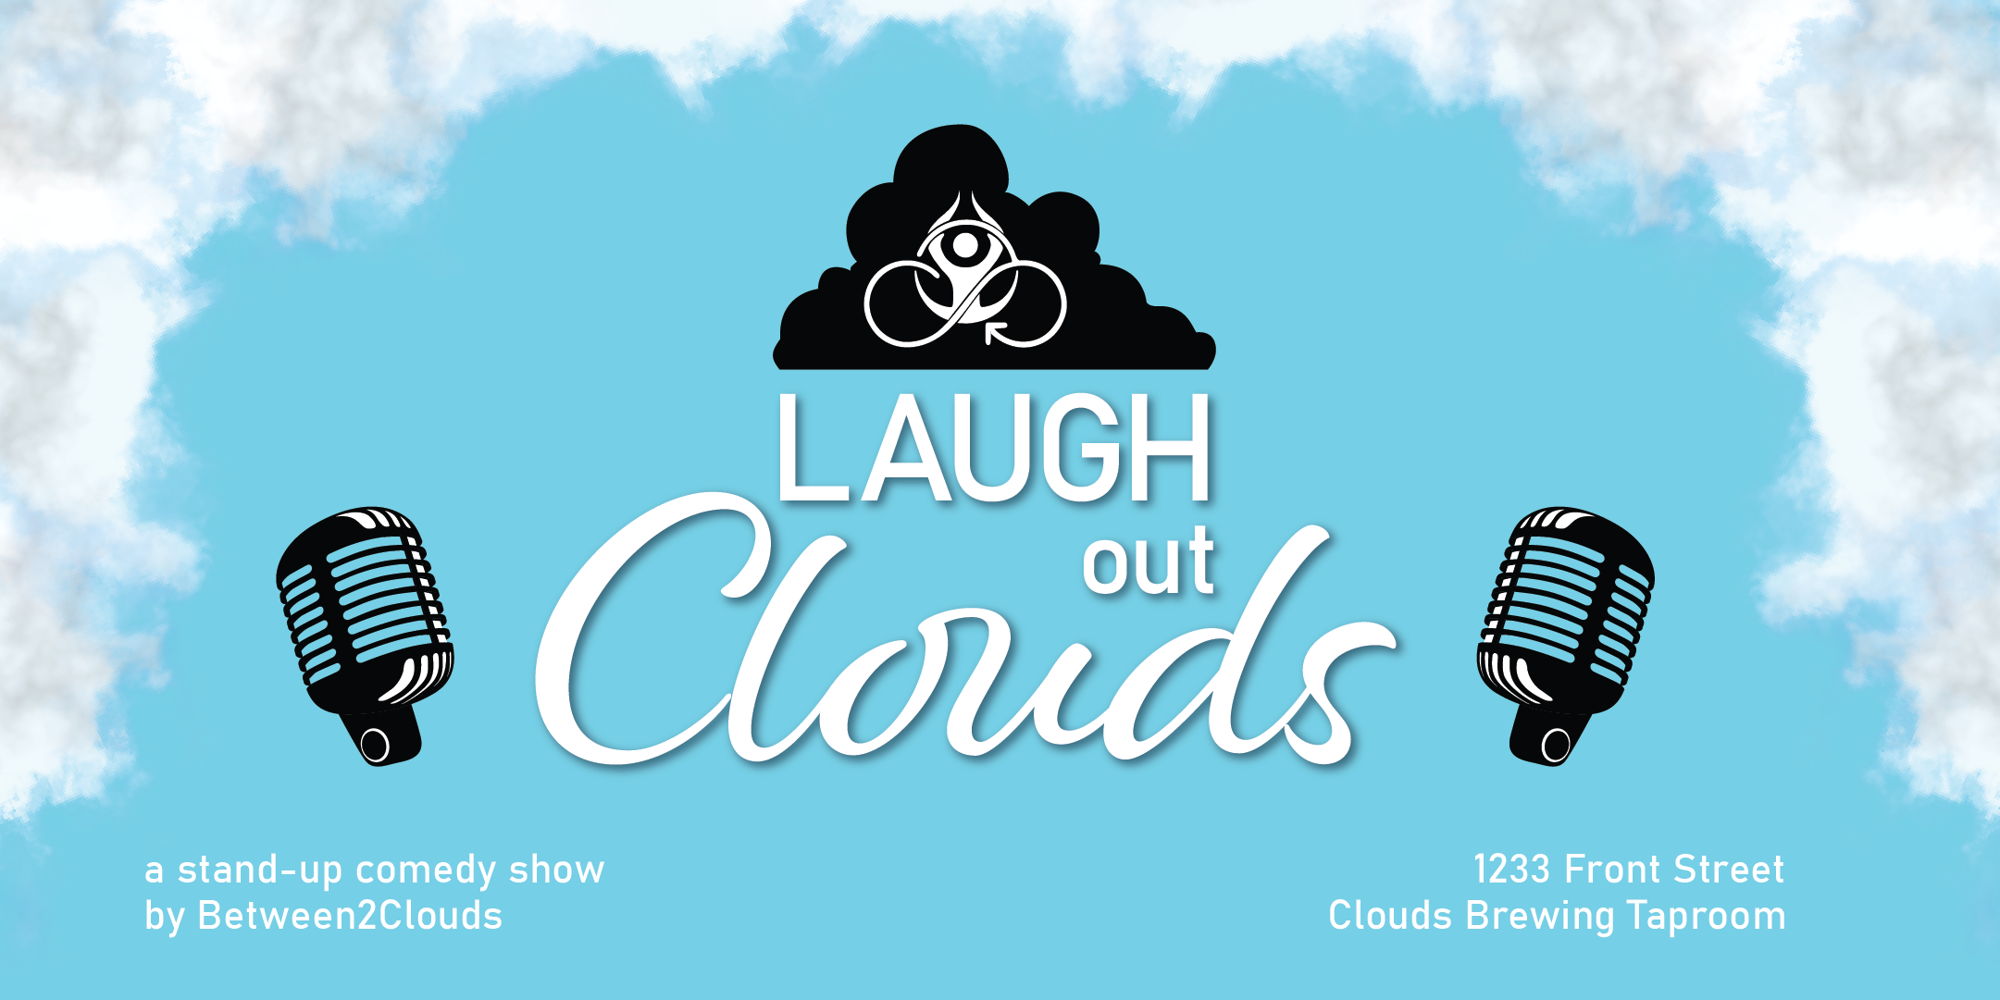 Laugh Out Clouds: a stand up comedy show promotional image